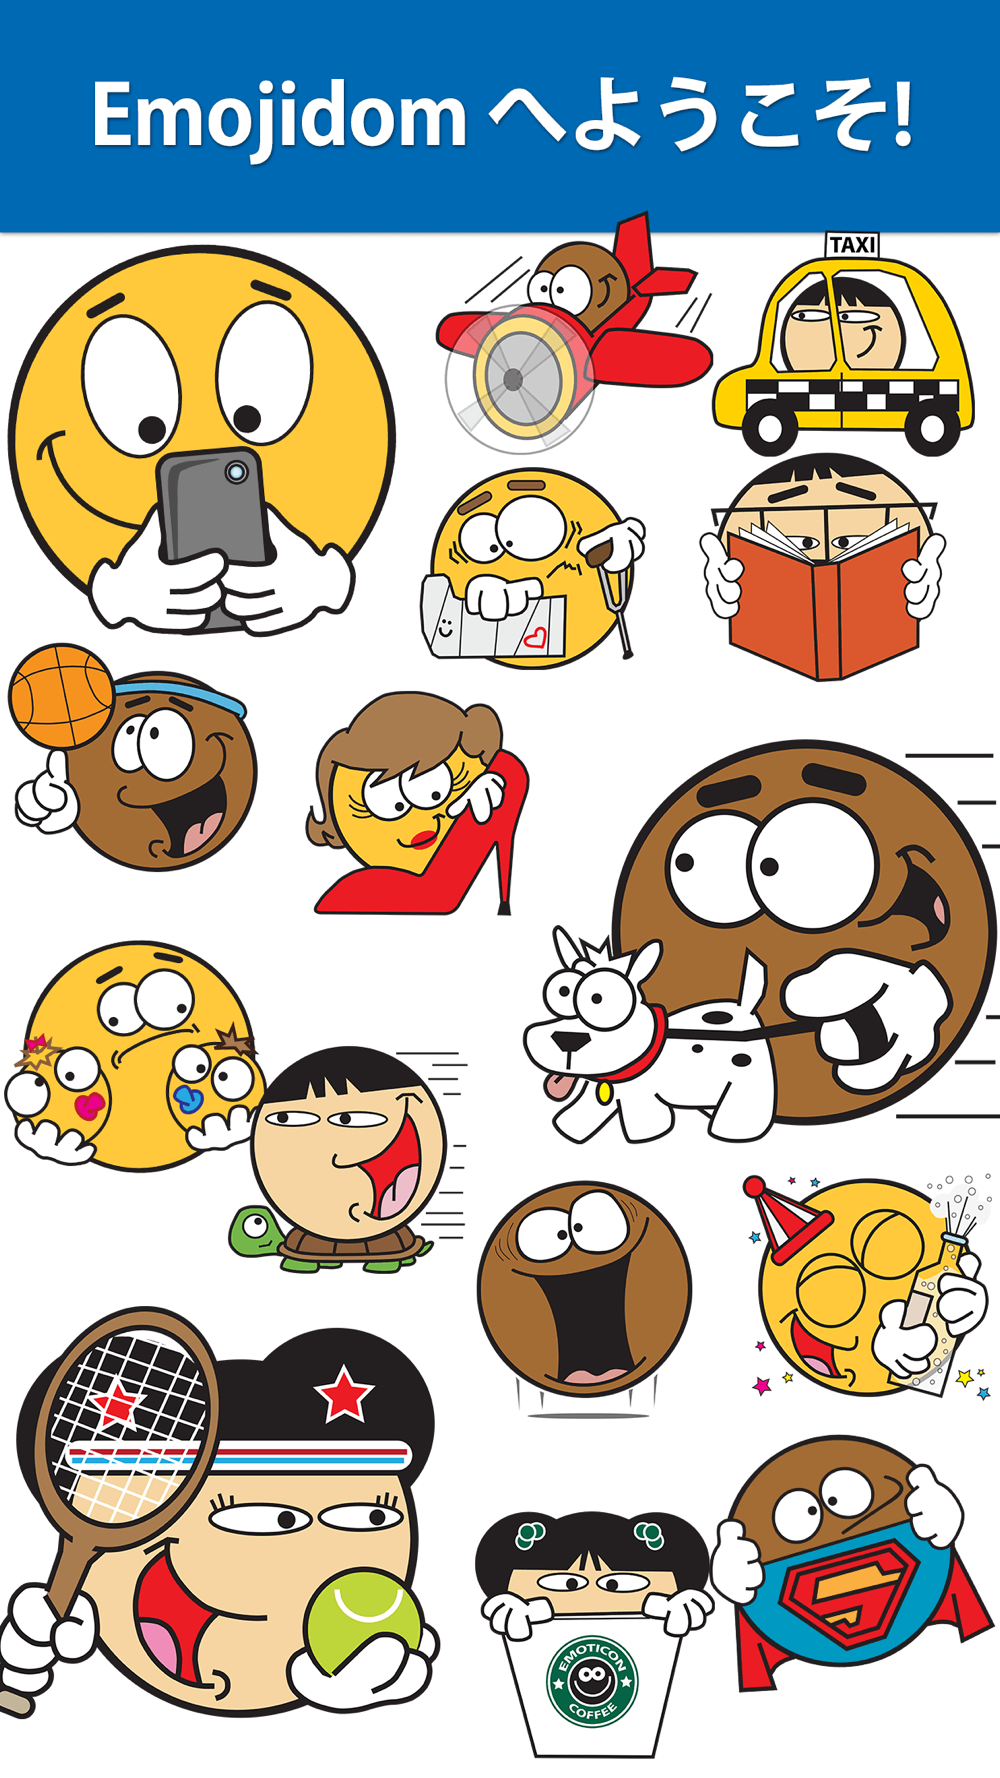 Emojidom 絵文字 顔文字 スマイリー ステッカー Free Download App For Iphone Steprimo Com